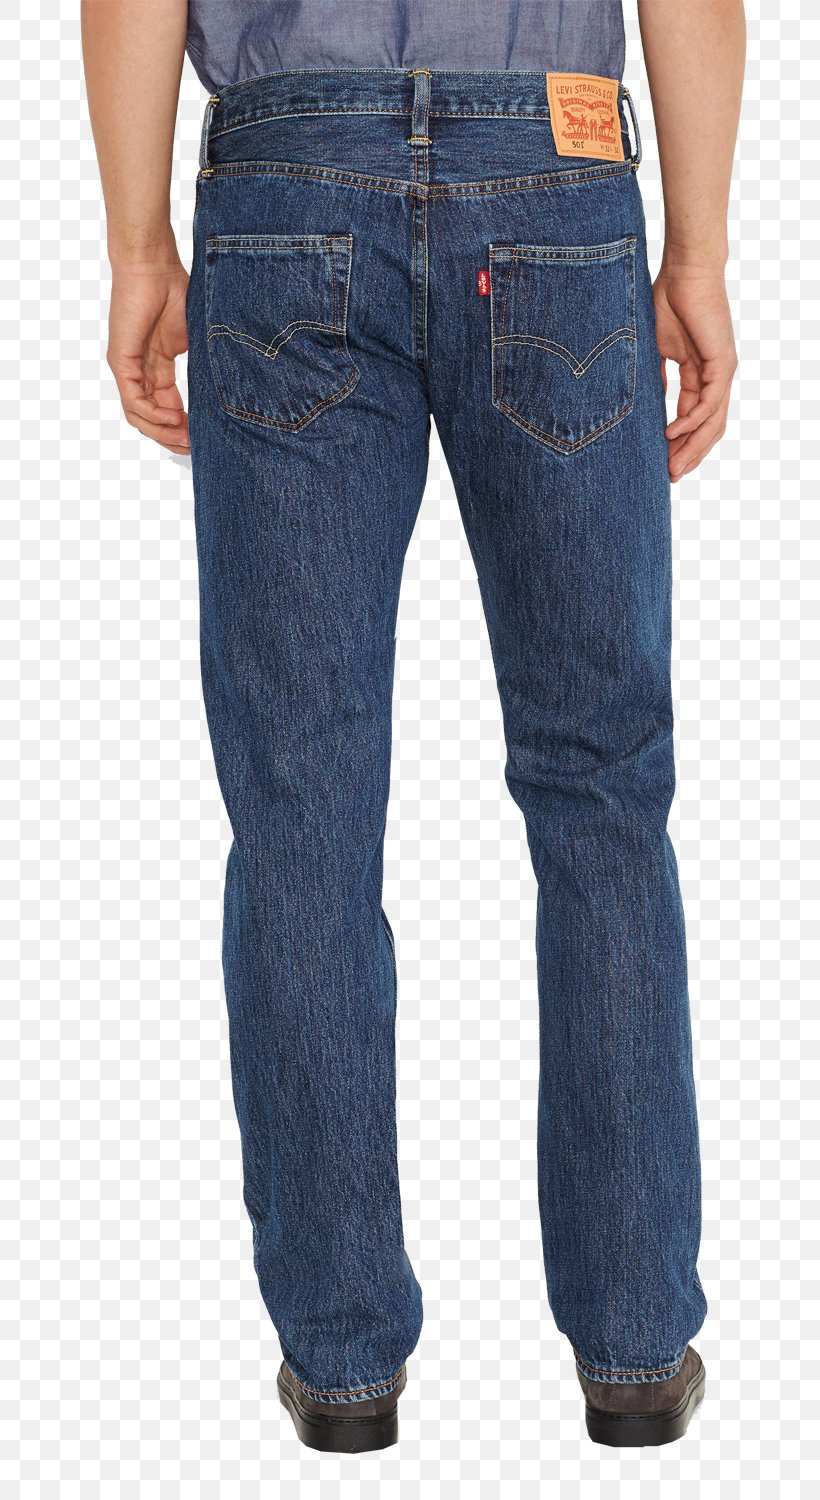 Levi Strauss & Co. Jeans Boot Slim-fit Pants Clothing, PNG, 802x1500px, Levi Strauss Co, Blue, Boot, Carpenter Jeans, Clothing Download Free